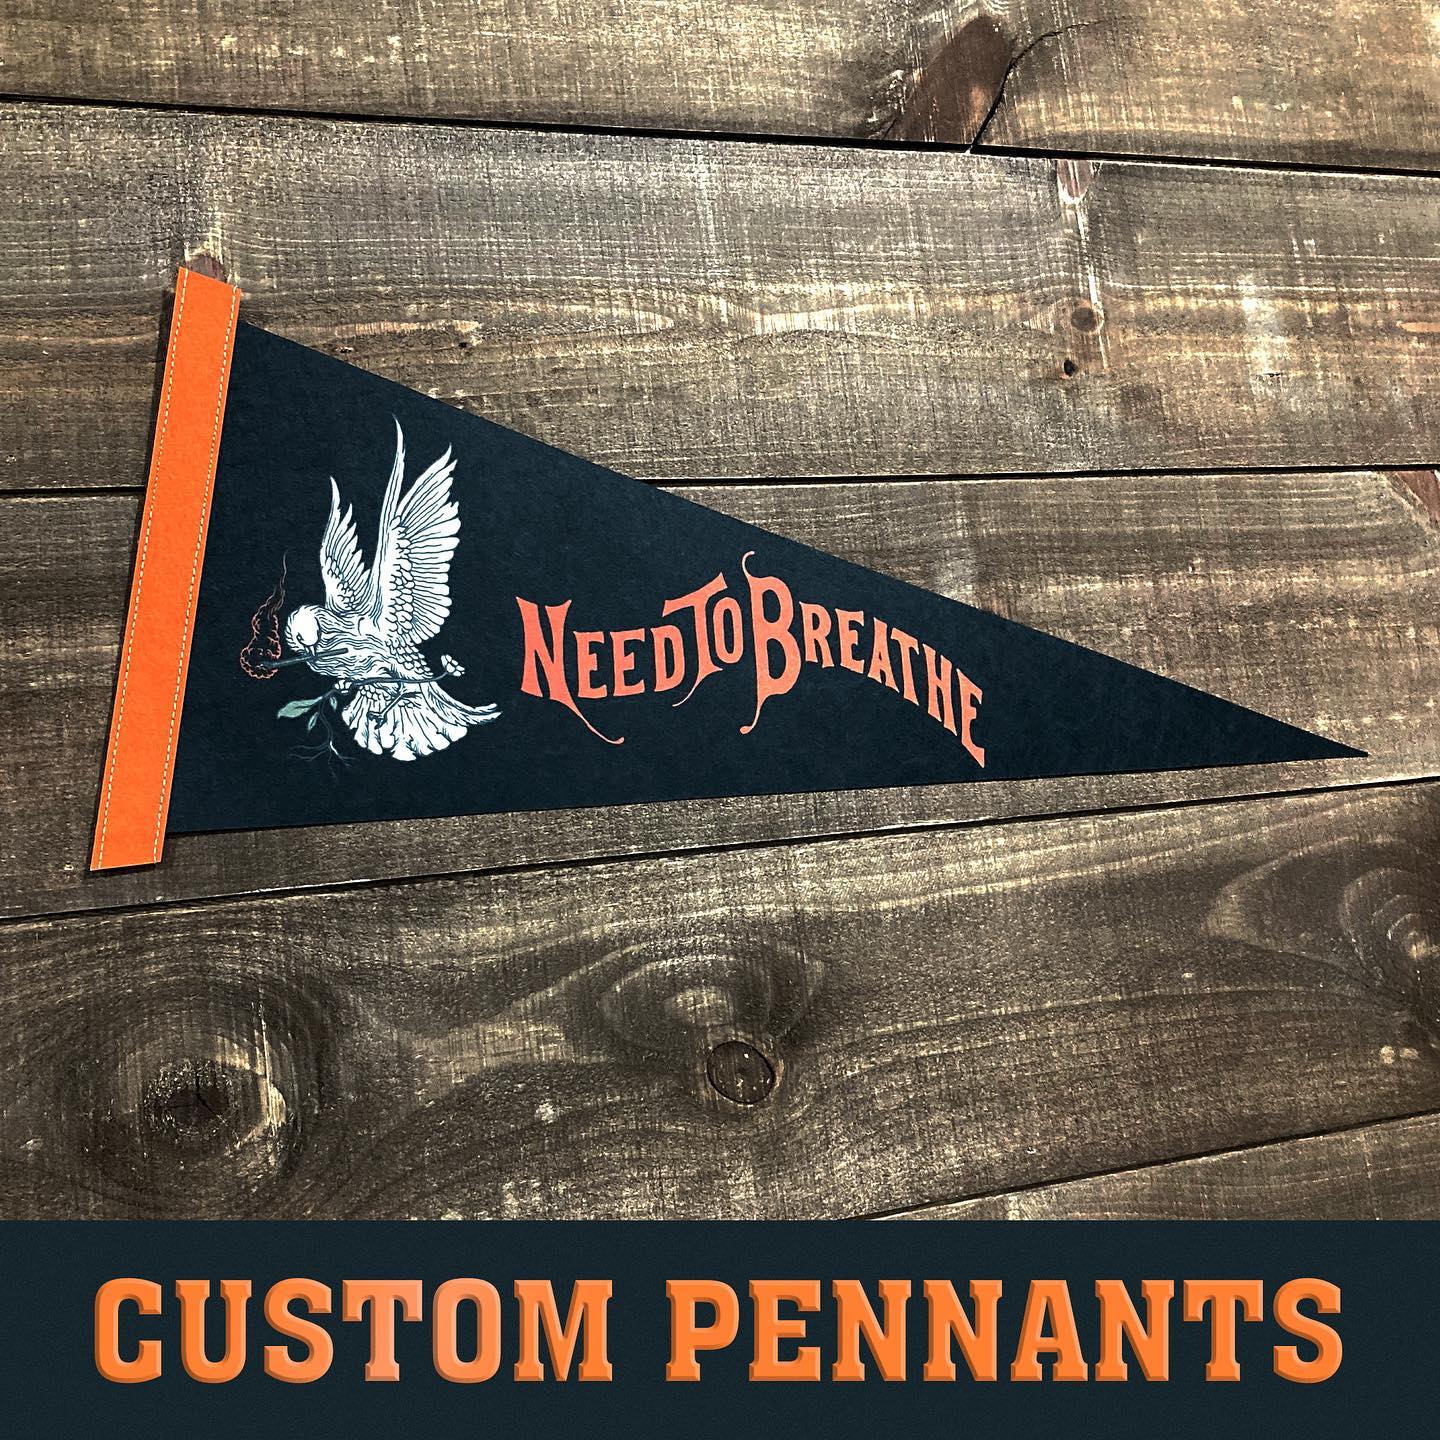 Custom Felt Pennants. A great way to support your favorite sports team, band, or local business. @needtobreathe #favoritecompanyband #needtobreathe #pennant #pennants #feltpennant #flag